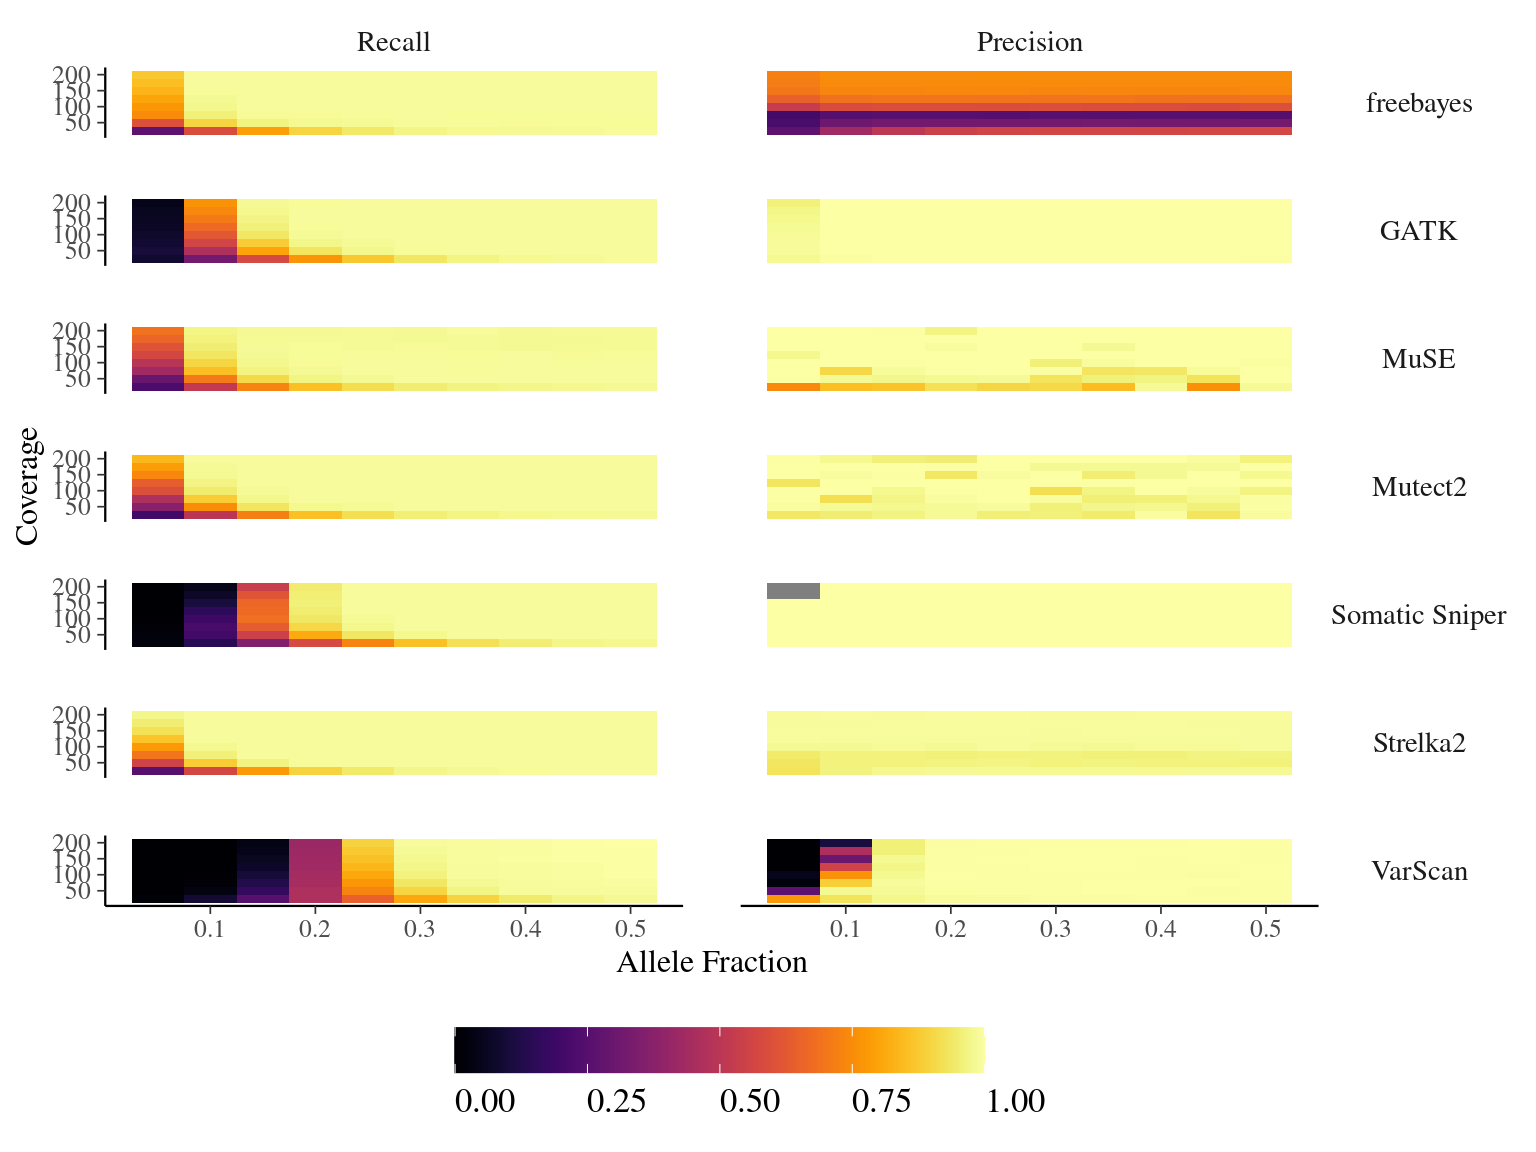 Performance of mutation detection tools  with allelic fraction and coverage. The inferno, black to yellow, colour scale indicates the recall and the precision rates for each tool to detect mutations.